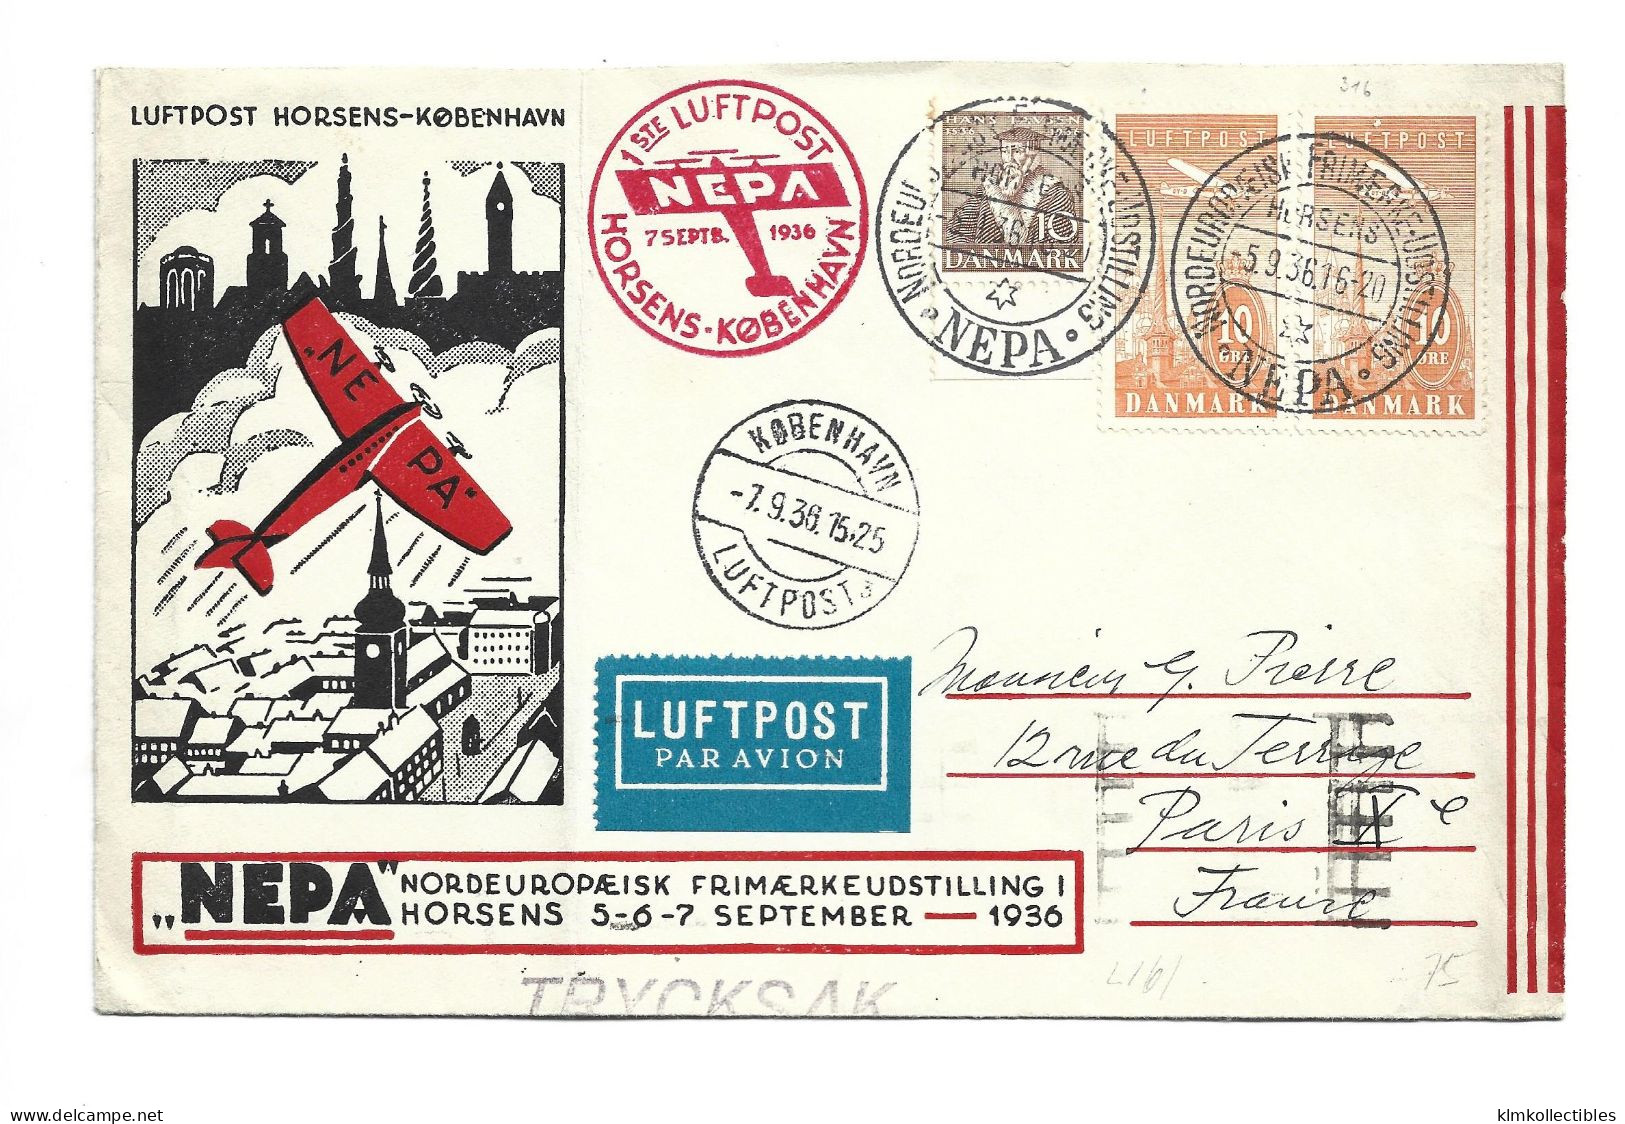 DENMARK DANMARK - AIRMAIL LUFTPOST COVER TO FRANCE - 1936 NEPA SPECIAL CANCEL FIRST 1ST FLIGHT - Luftpost